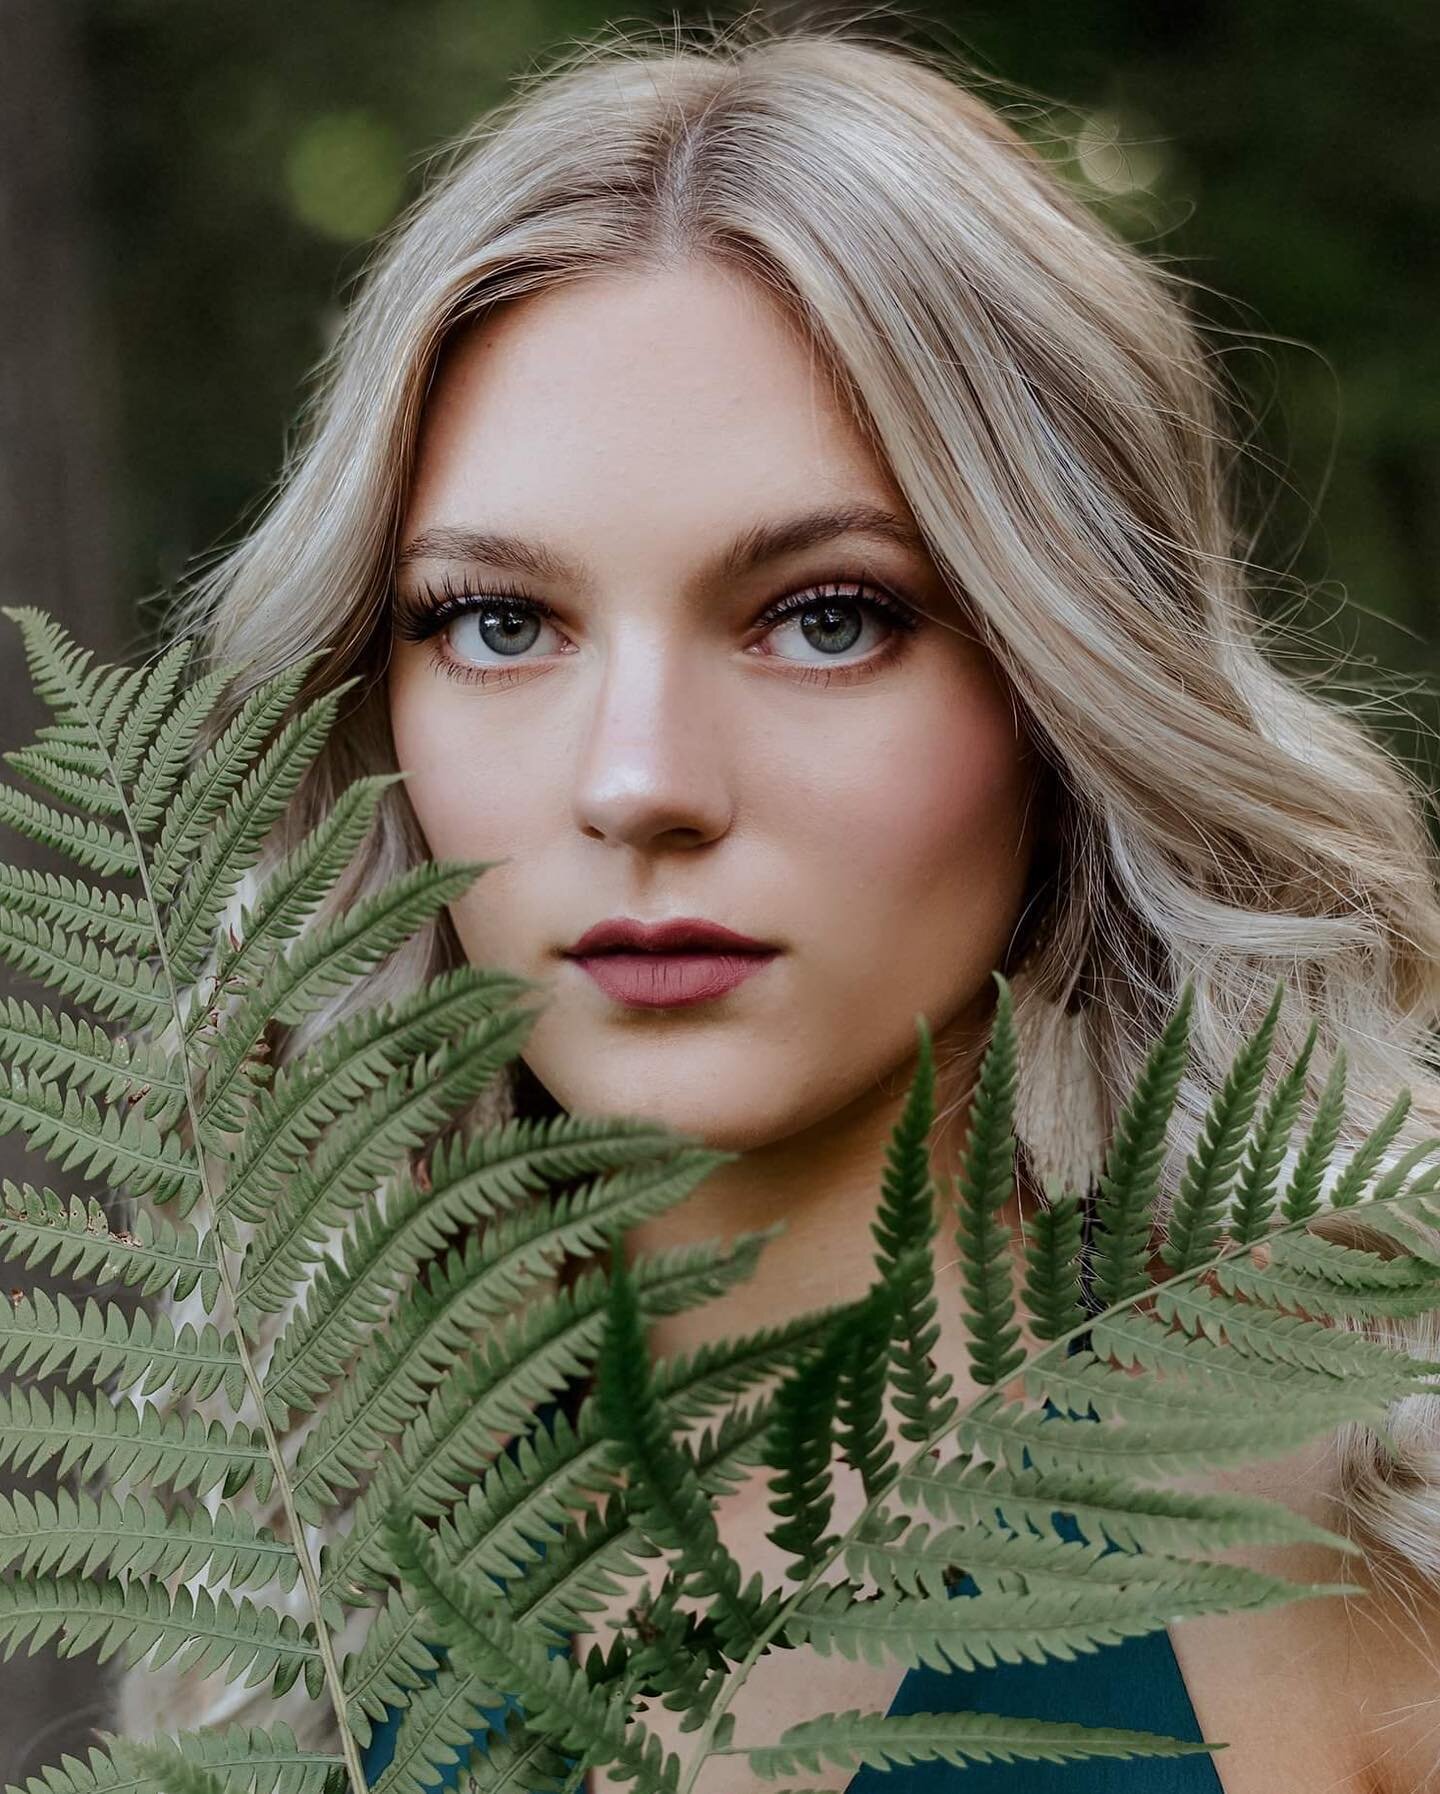 &ldquo;In all things of nature there is something of the marvelous.&rdquo; - #aristotle #nature #portrait #ferns #editorialphotography #eyes #stylish #naturechic #flowydress #cowboyboots #lifestyle #nwiseniorphotographer #crownpoint #indiana #blondeh